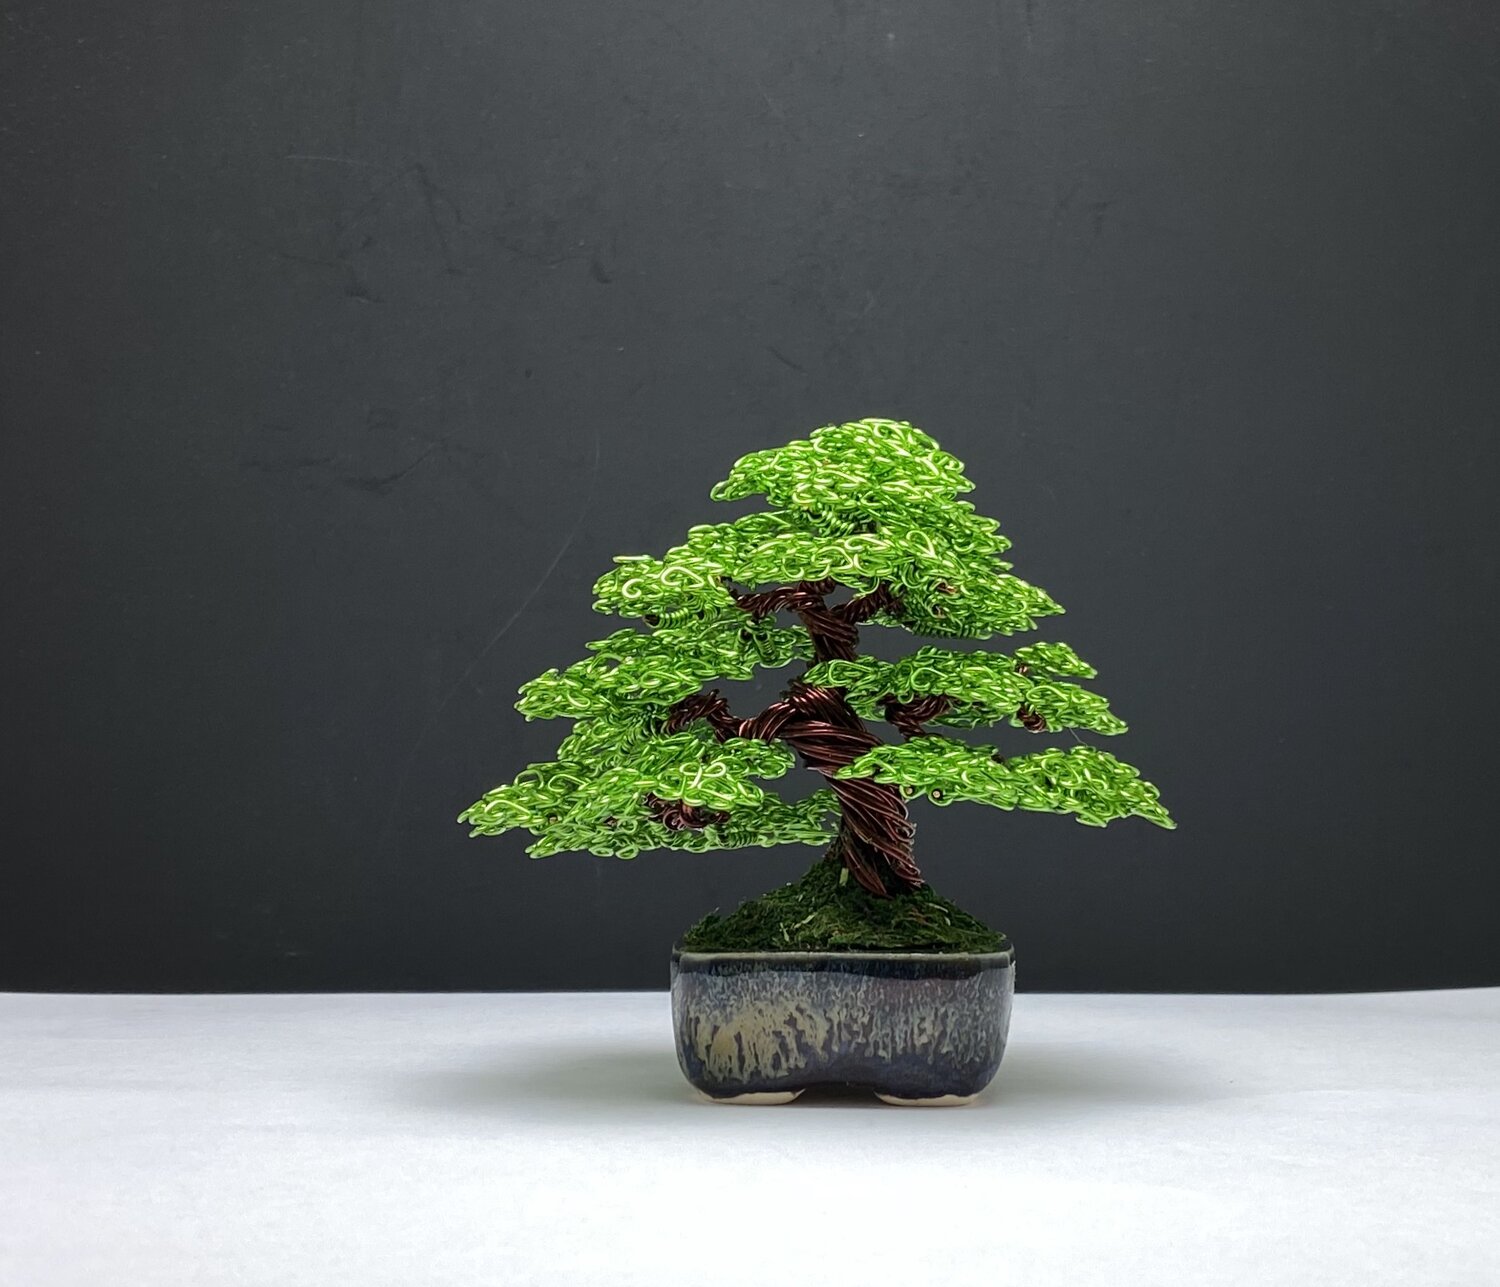 Green Informal Upright Mame Wire Bonsai Tree Sculpture by Ken To 